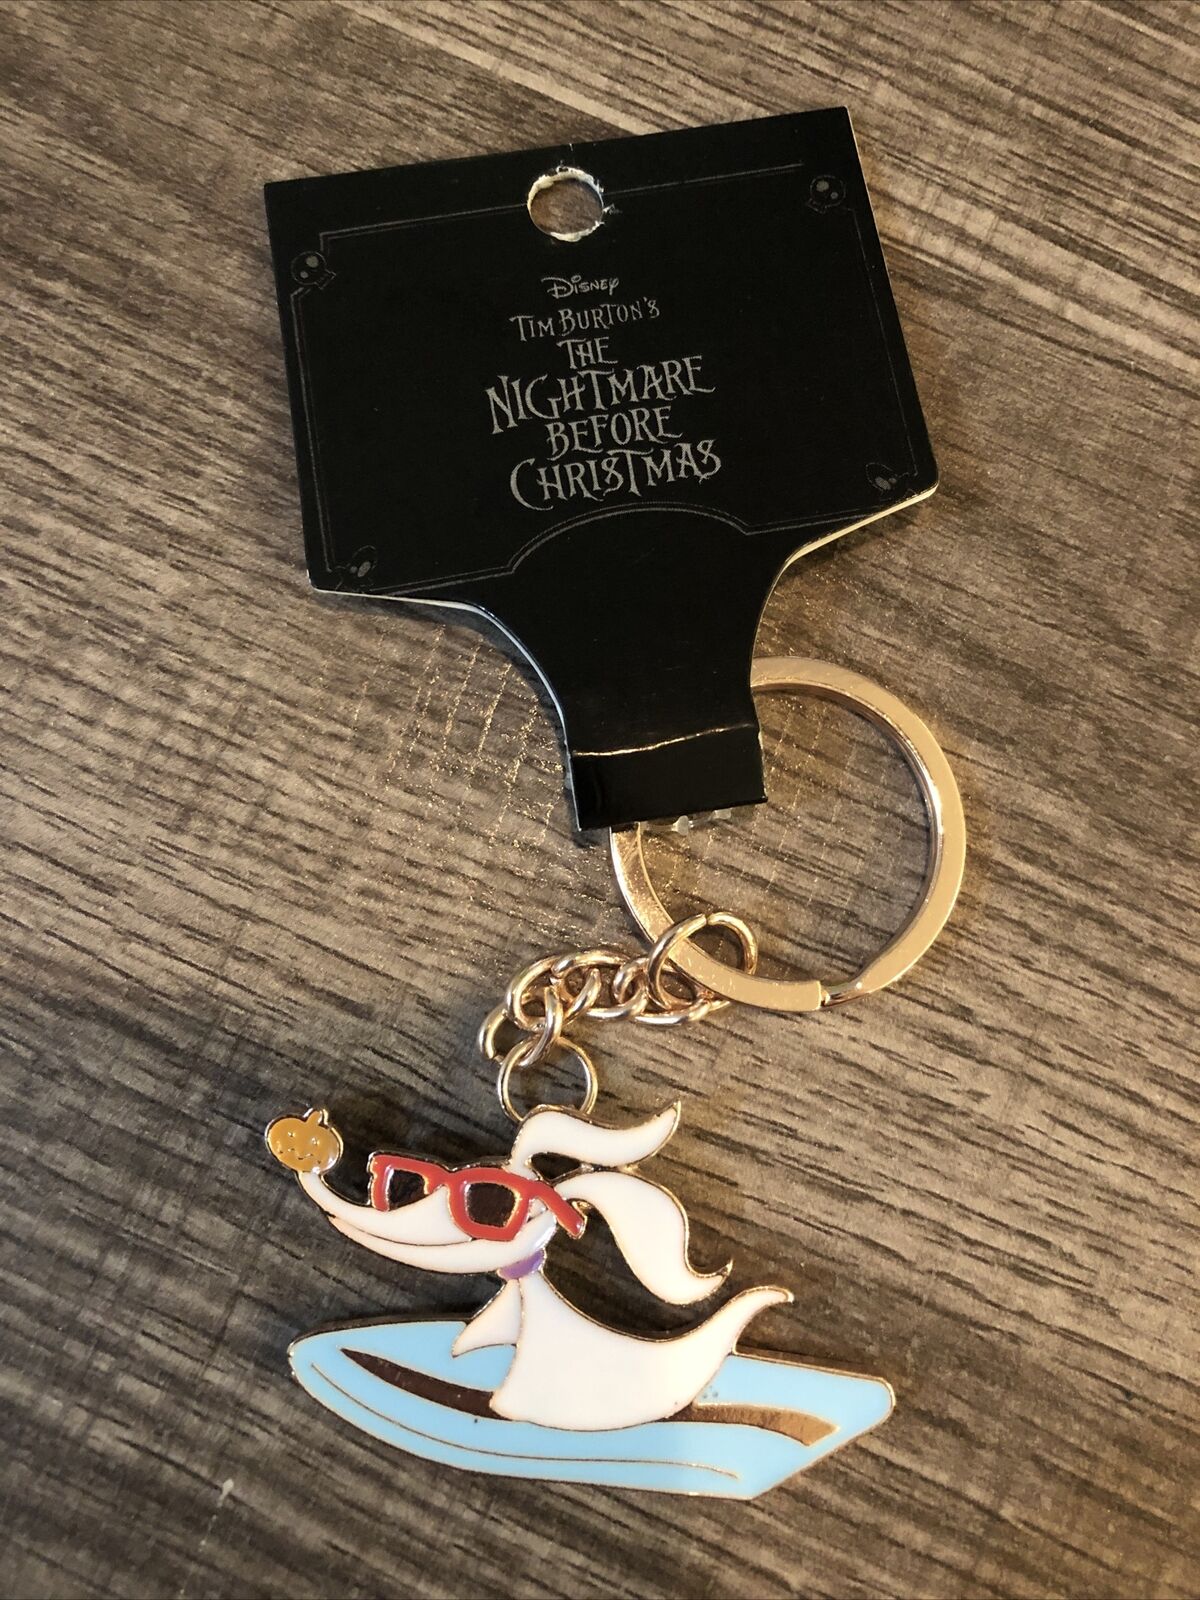 New With Tags! Disney Nightmare Before Christmas Surfing Zero Metal Key Chain!